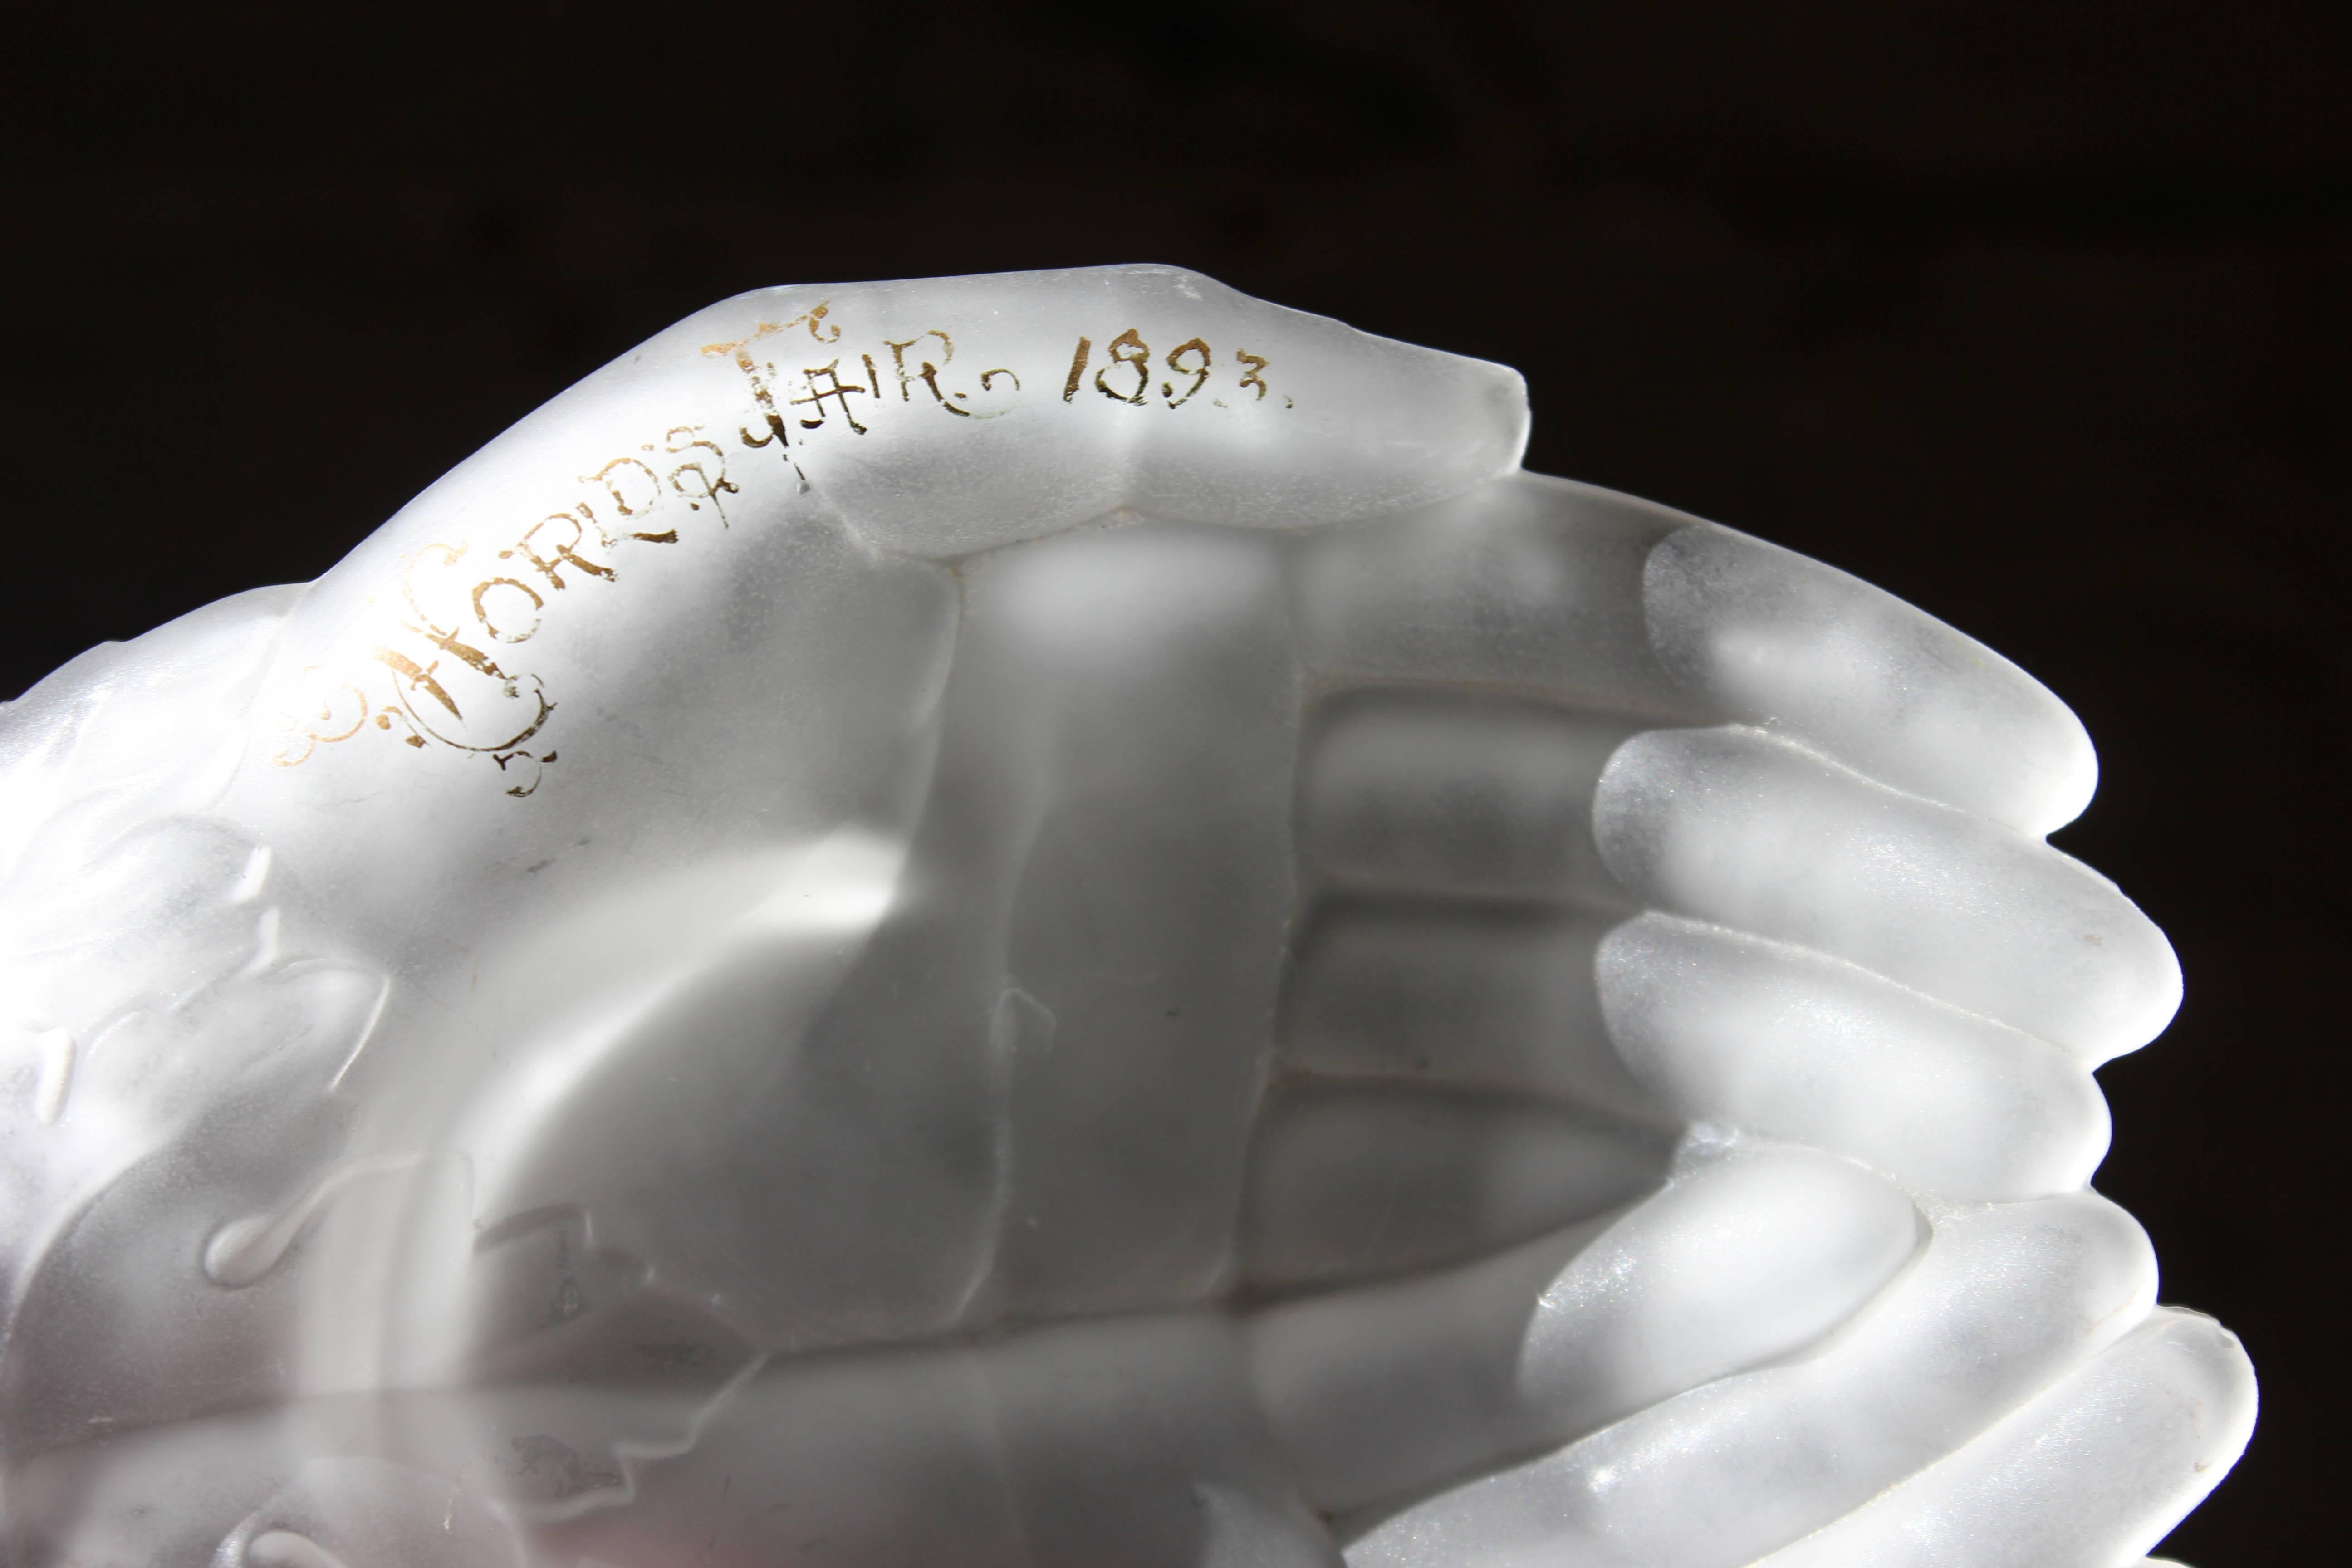 The fine quality clear frosted and acid-etched glass dish crisply modelled in the form of cupped hands or ‘gowpen’ with a cluster of grapes and leaves at the wrist, sometimes called “Queen Victoria's Hands”, the base acid-etched with the ‘bee-case’